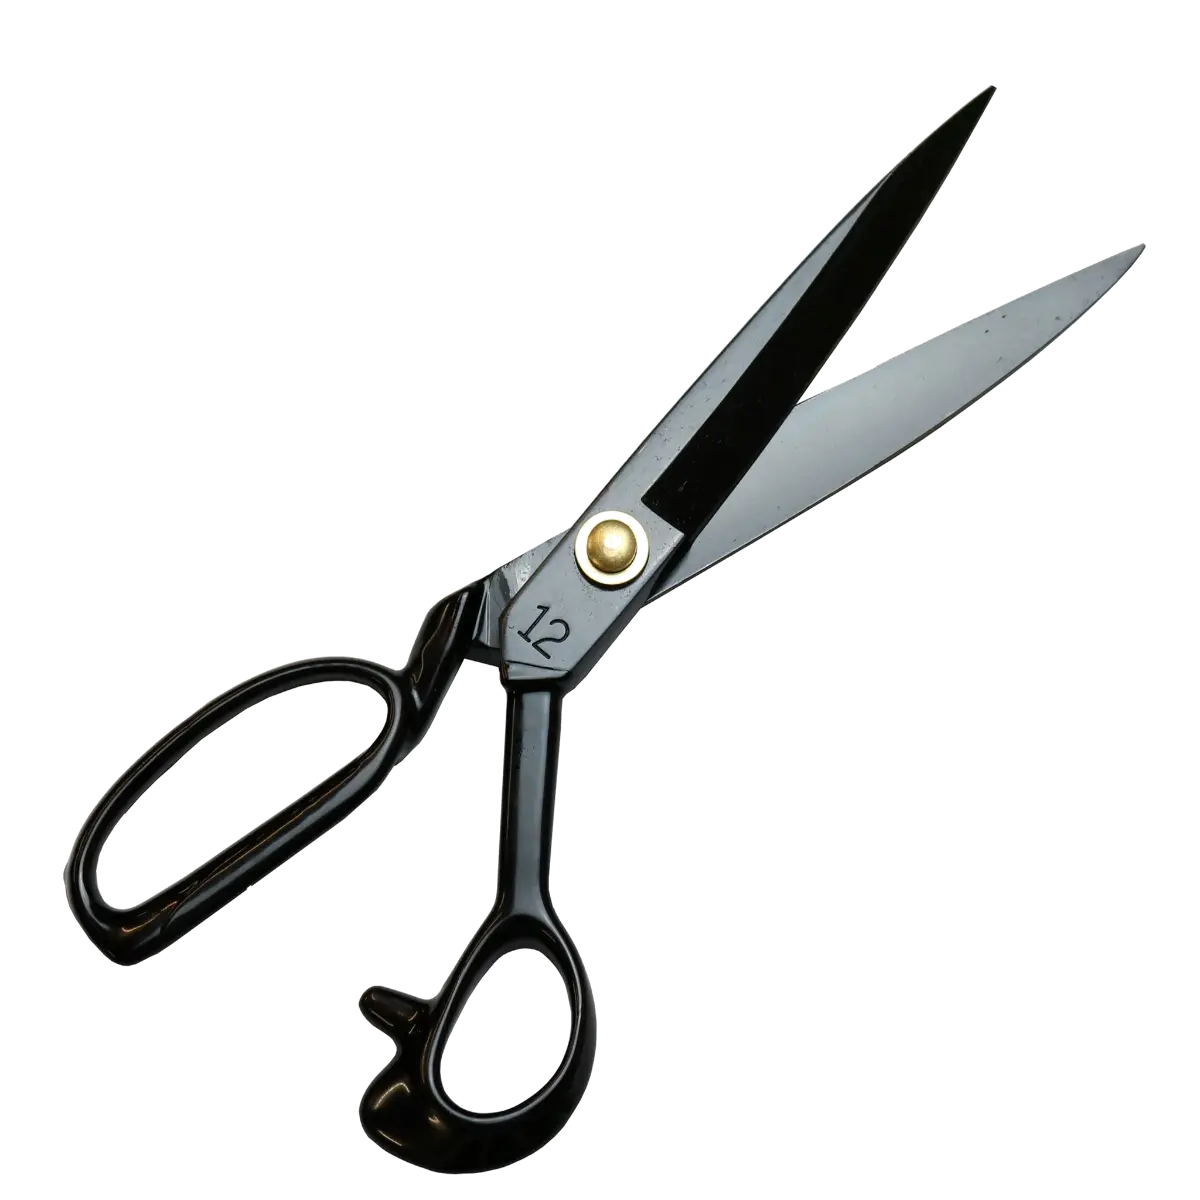 Onyx Unique high grade industrial shears, fully black hot forged steel